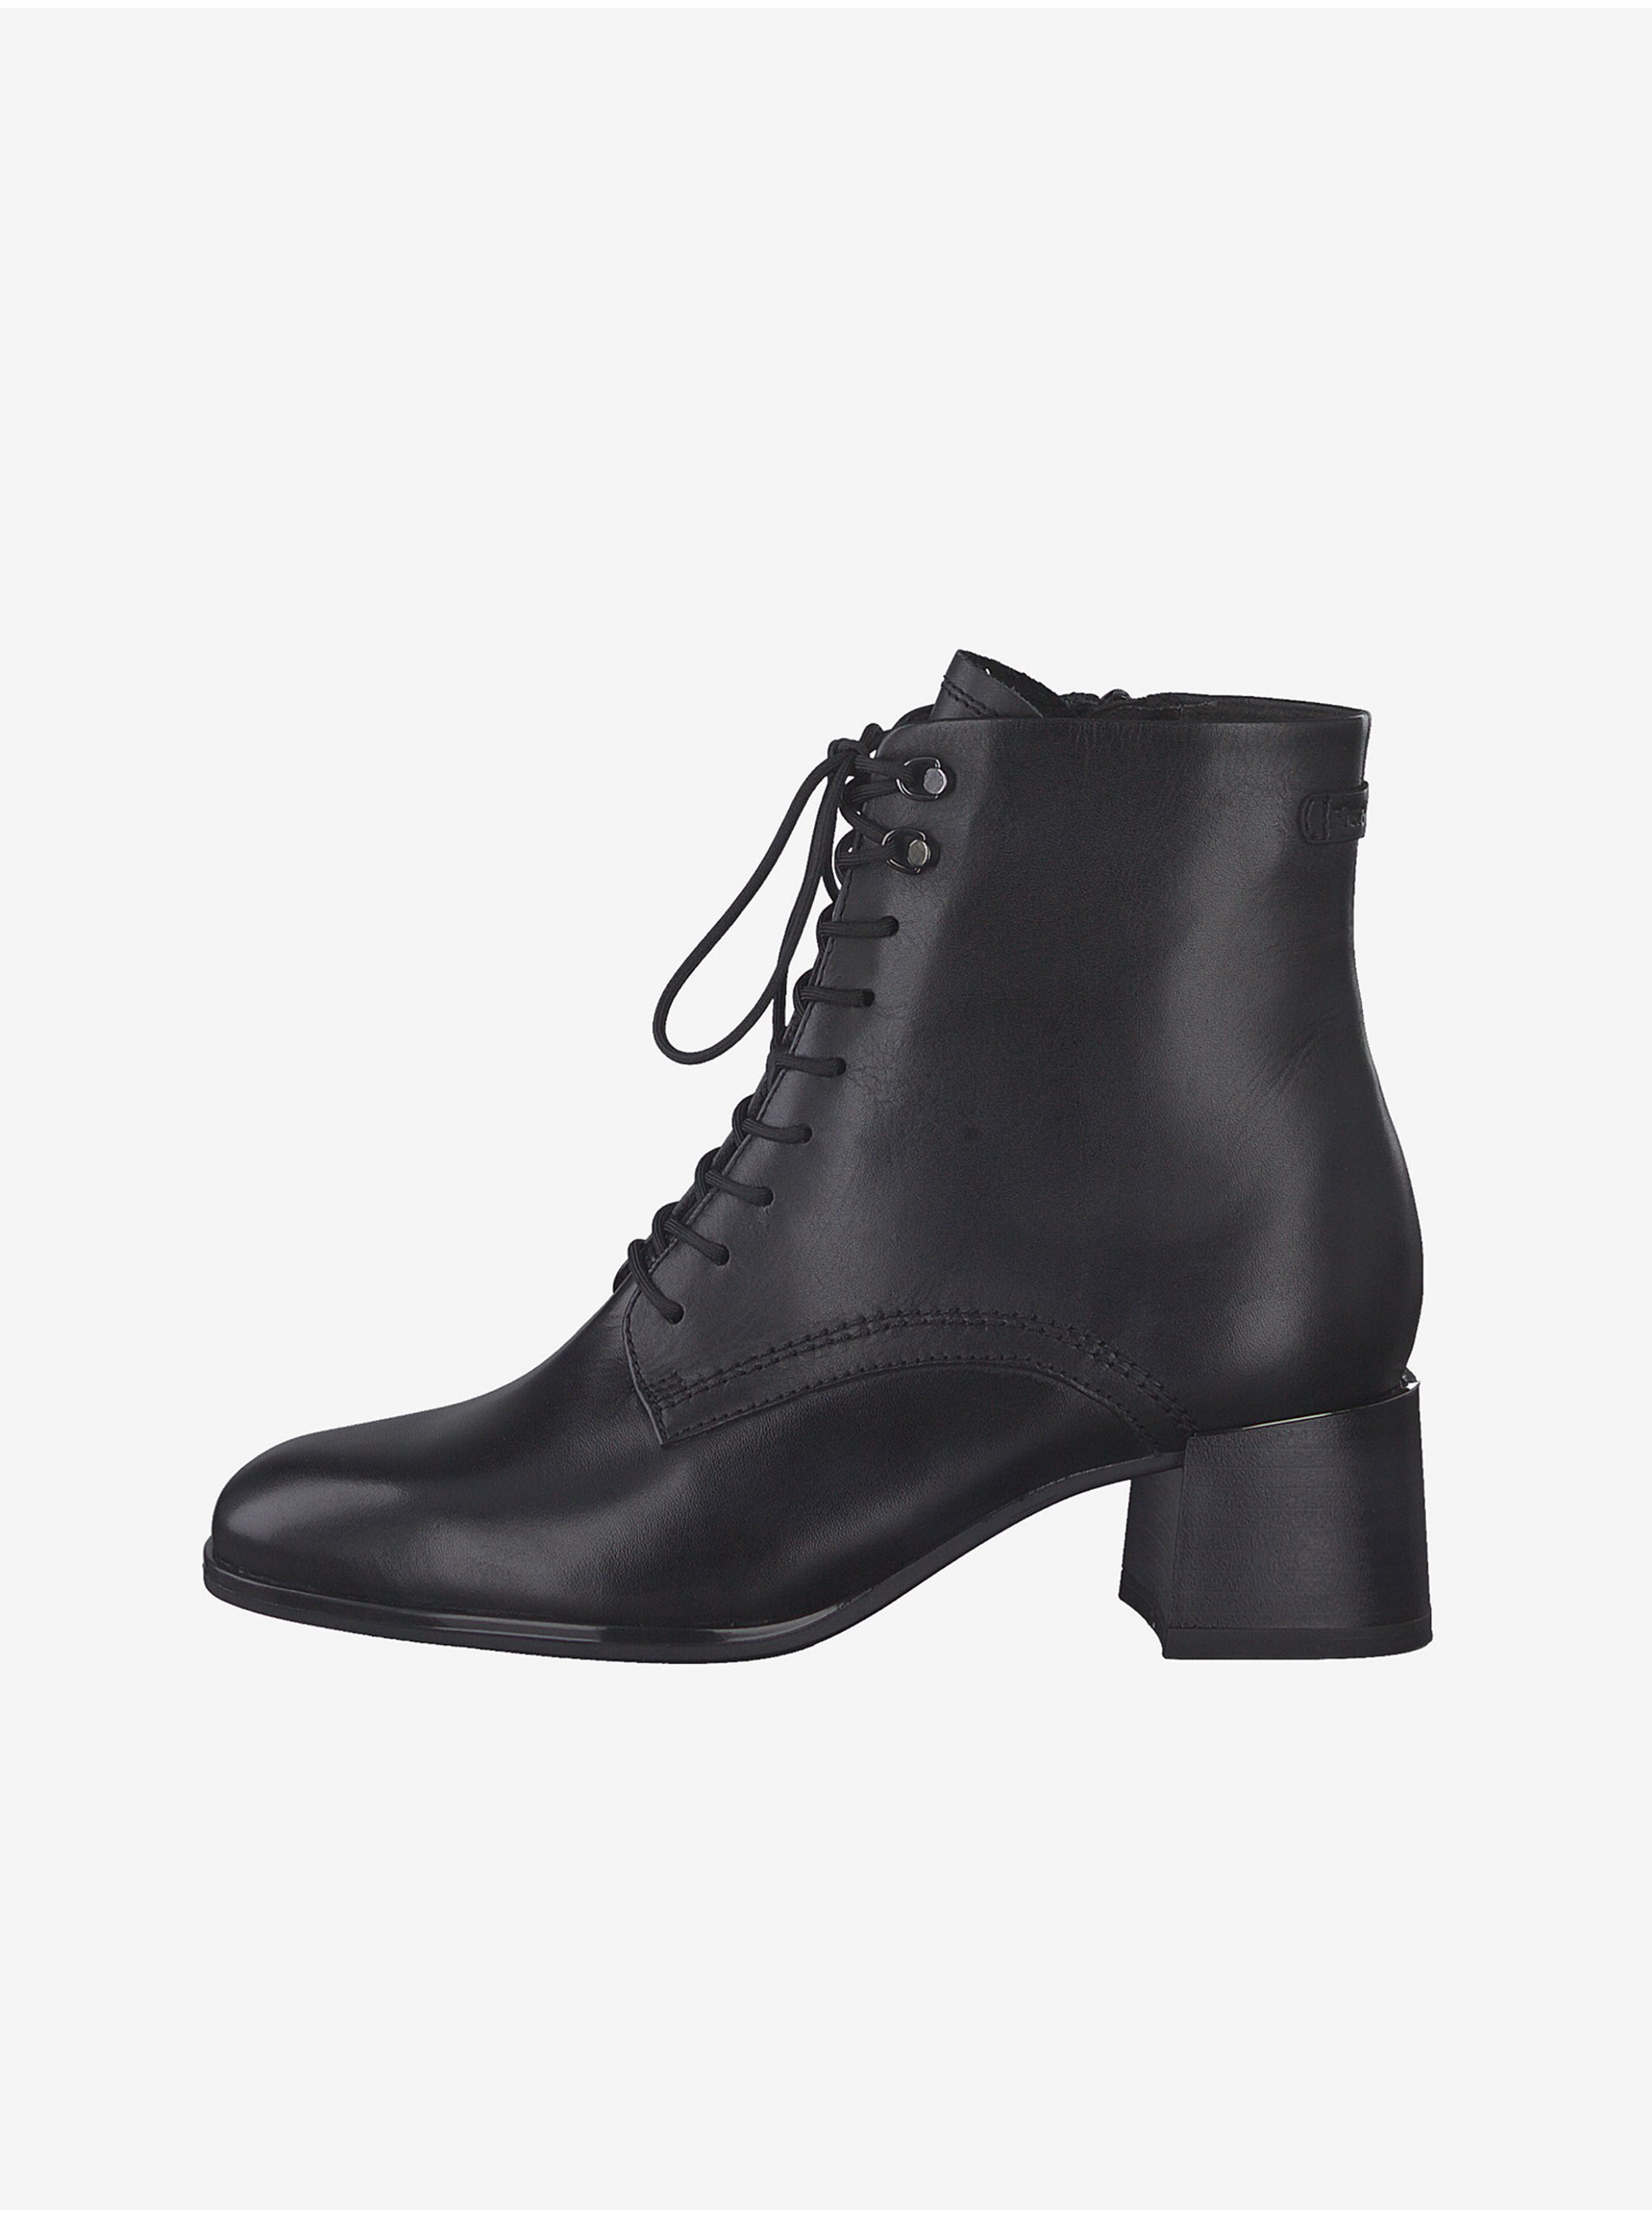 Black Leather Heeled Ankle Boots for Women Tamaris - Ladies